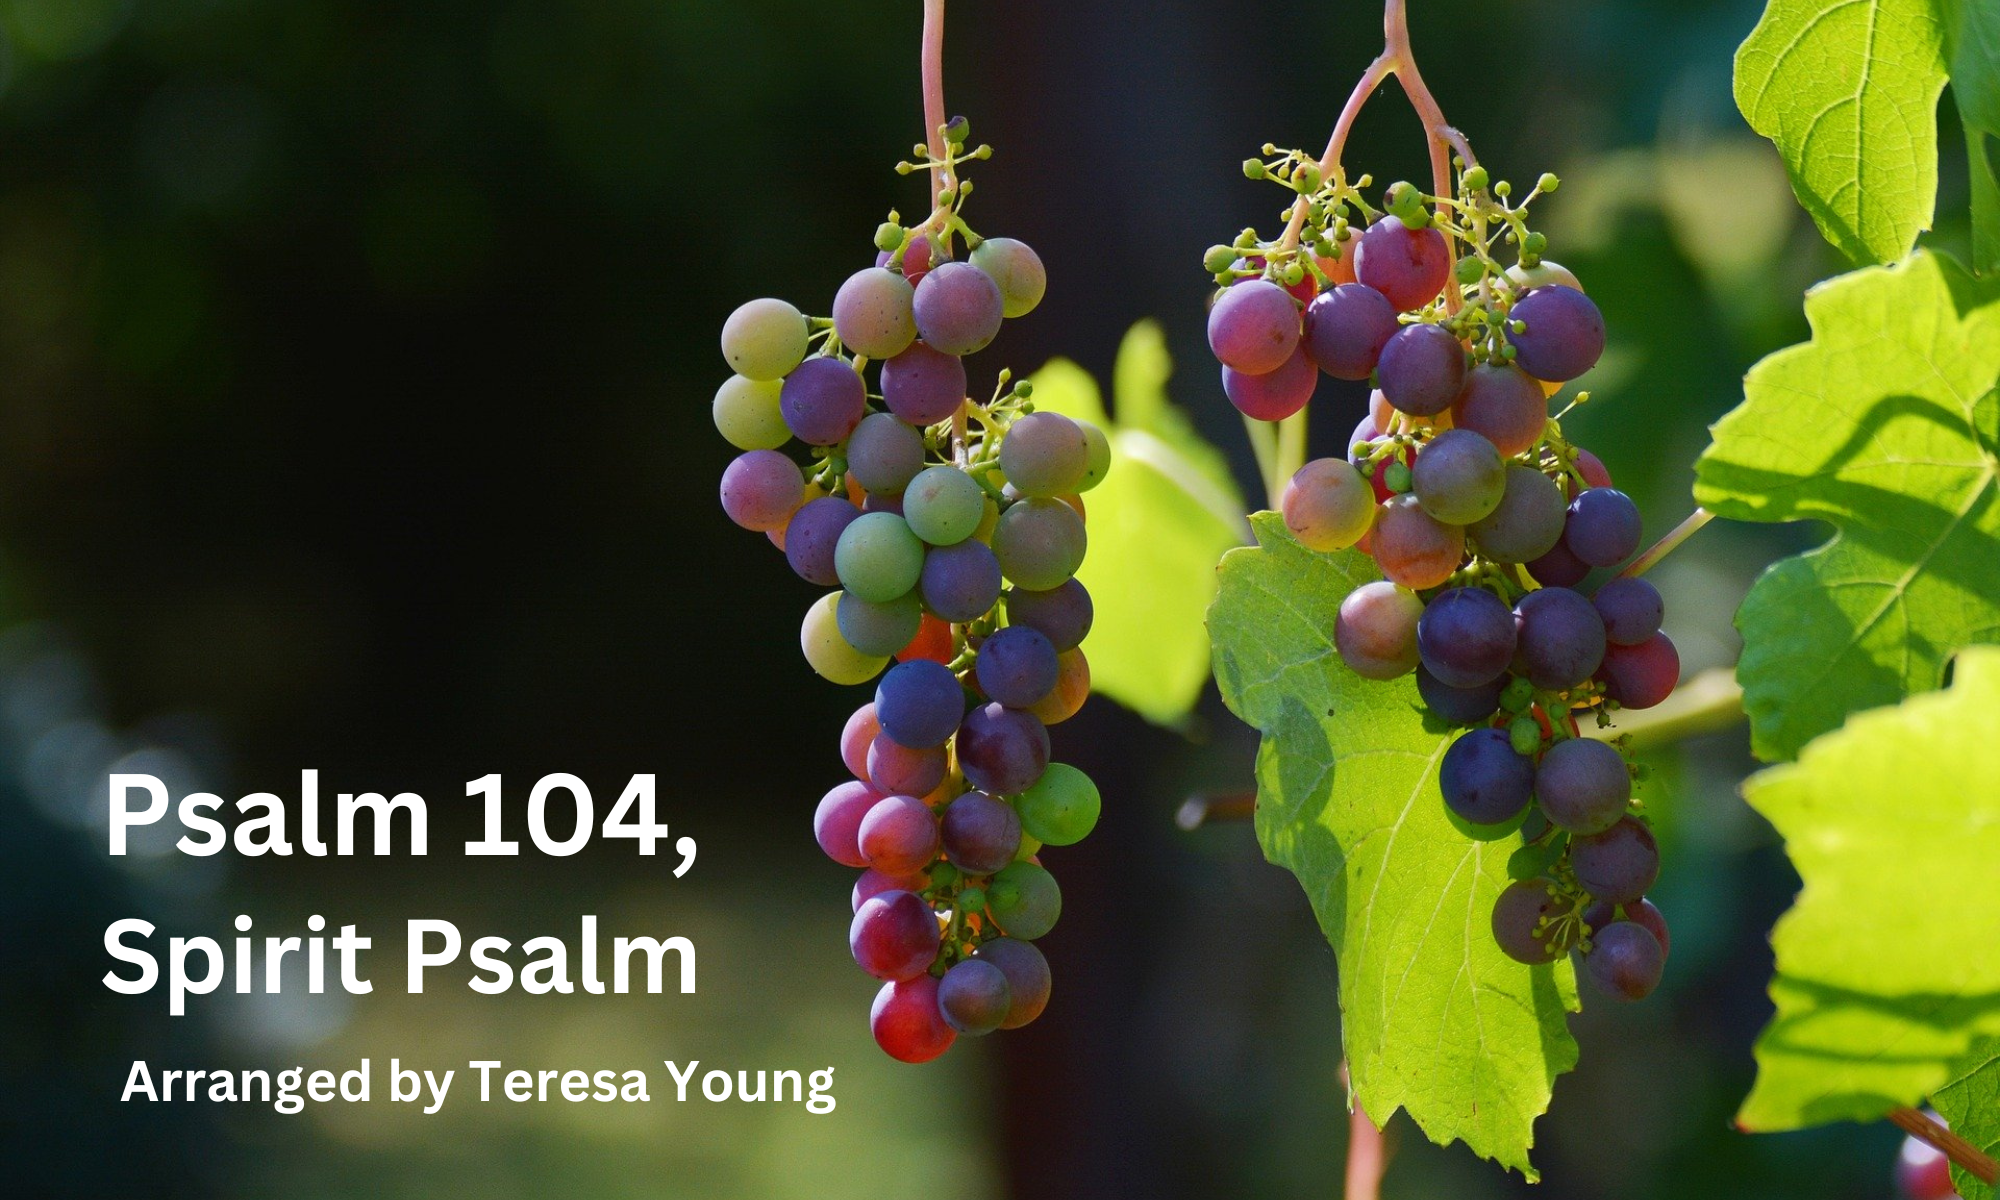 Psalm 104, Spirit Psalm, by Teresa Young